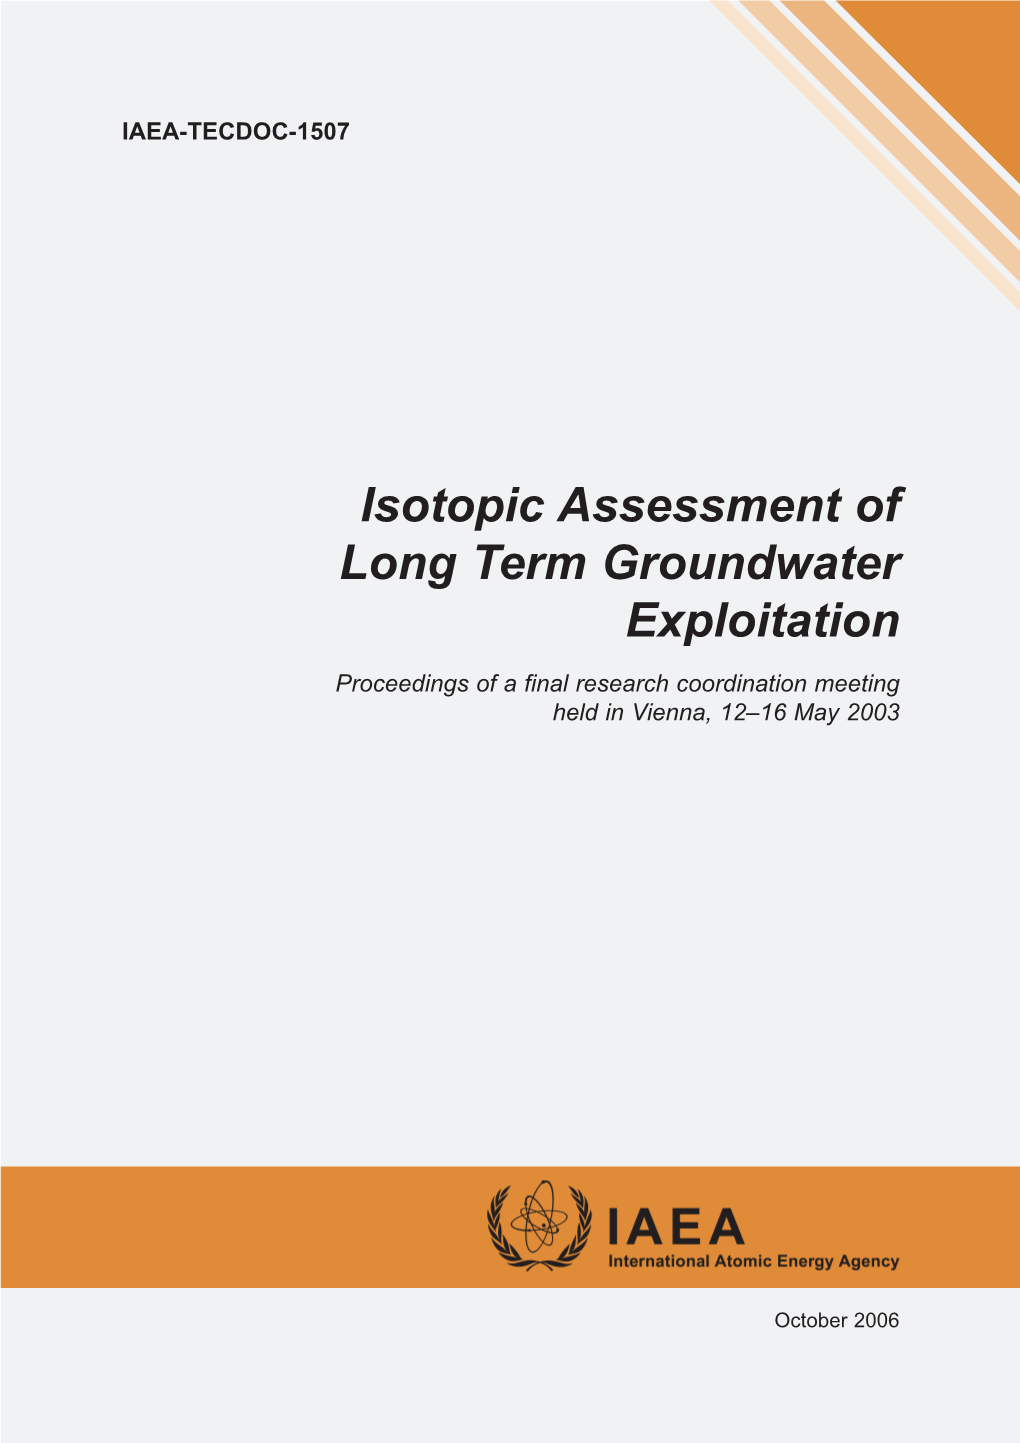 Isotopic Assessment of Long Term Groundwater Exploitation